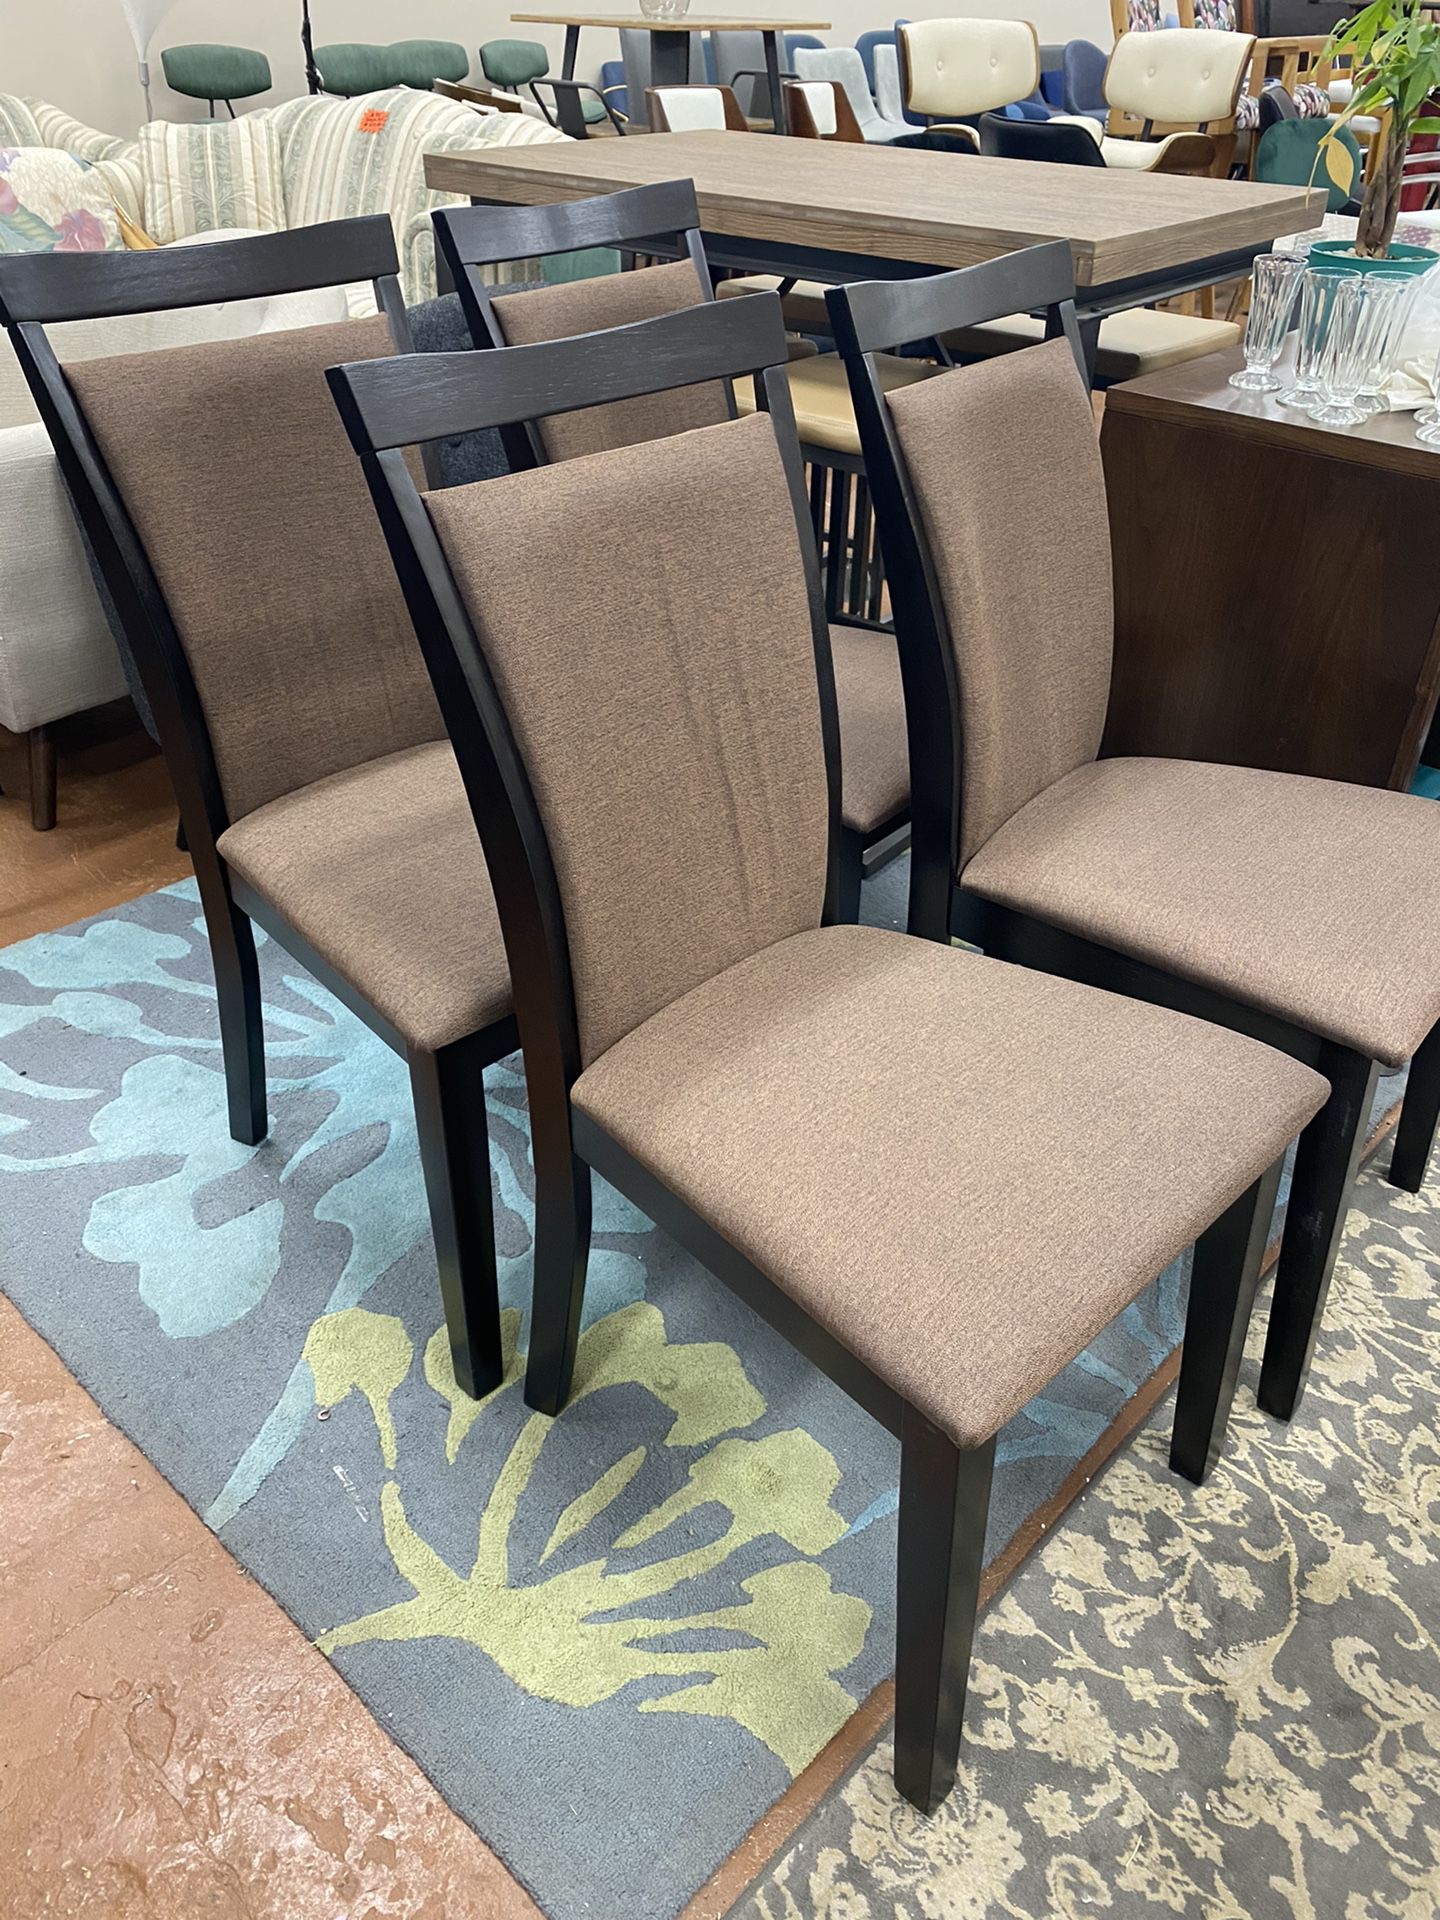 Dining chairs set of 4